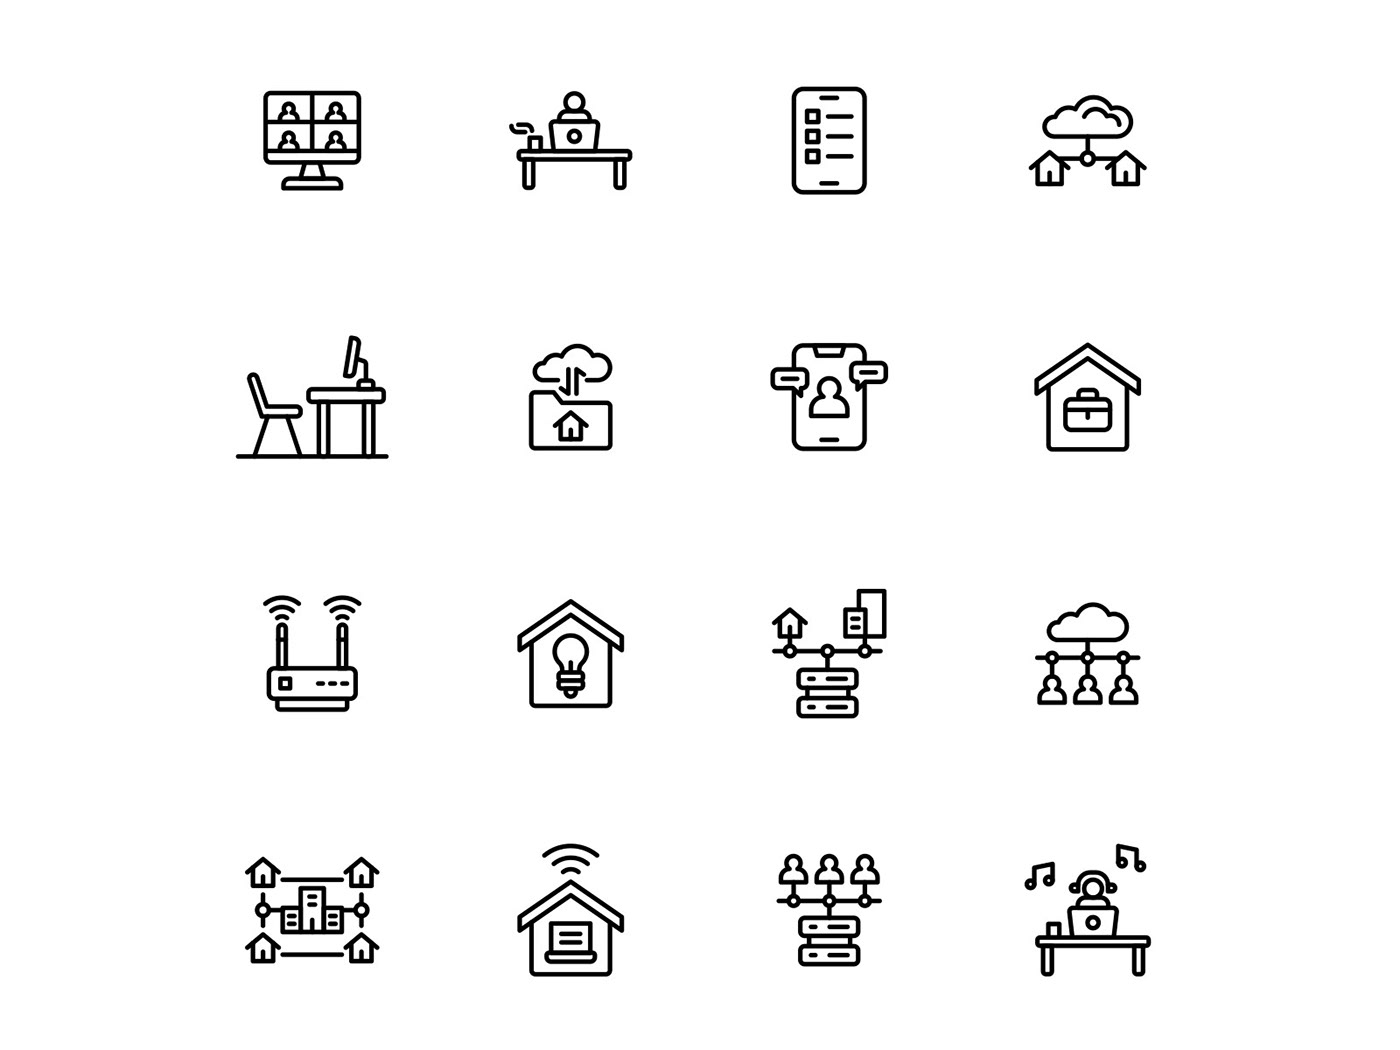 freebie icon design  icons download icons pack icons set vector design vector icon Work  work icon work vector